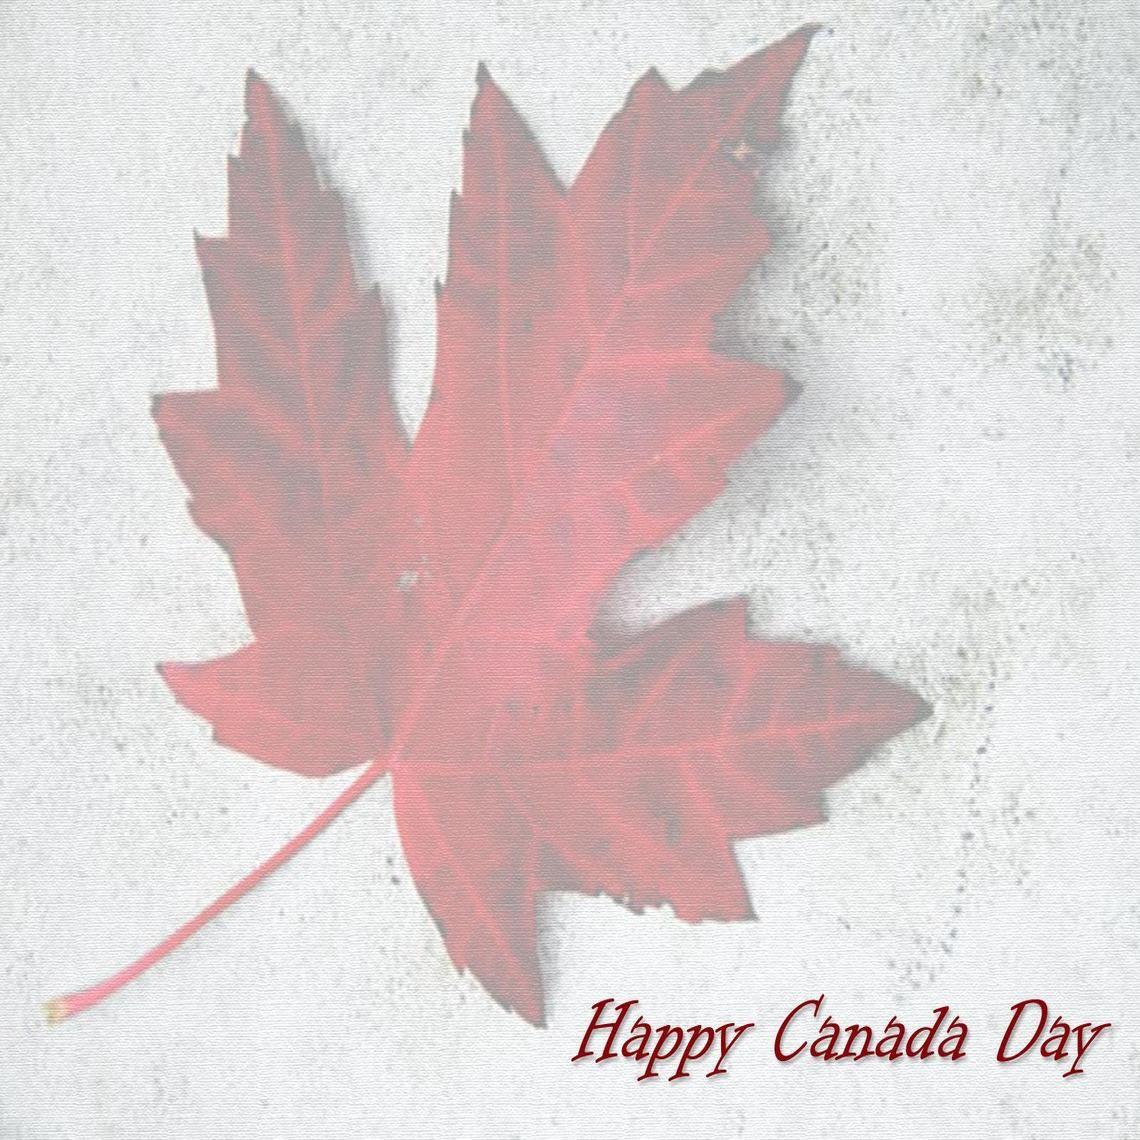 Happy Canada Day. wallpaper. Wallpaper and Rock